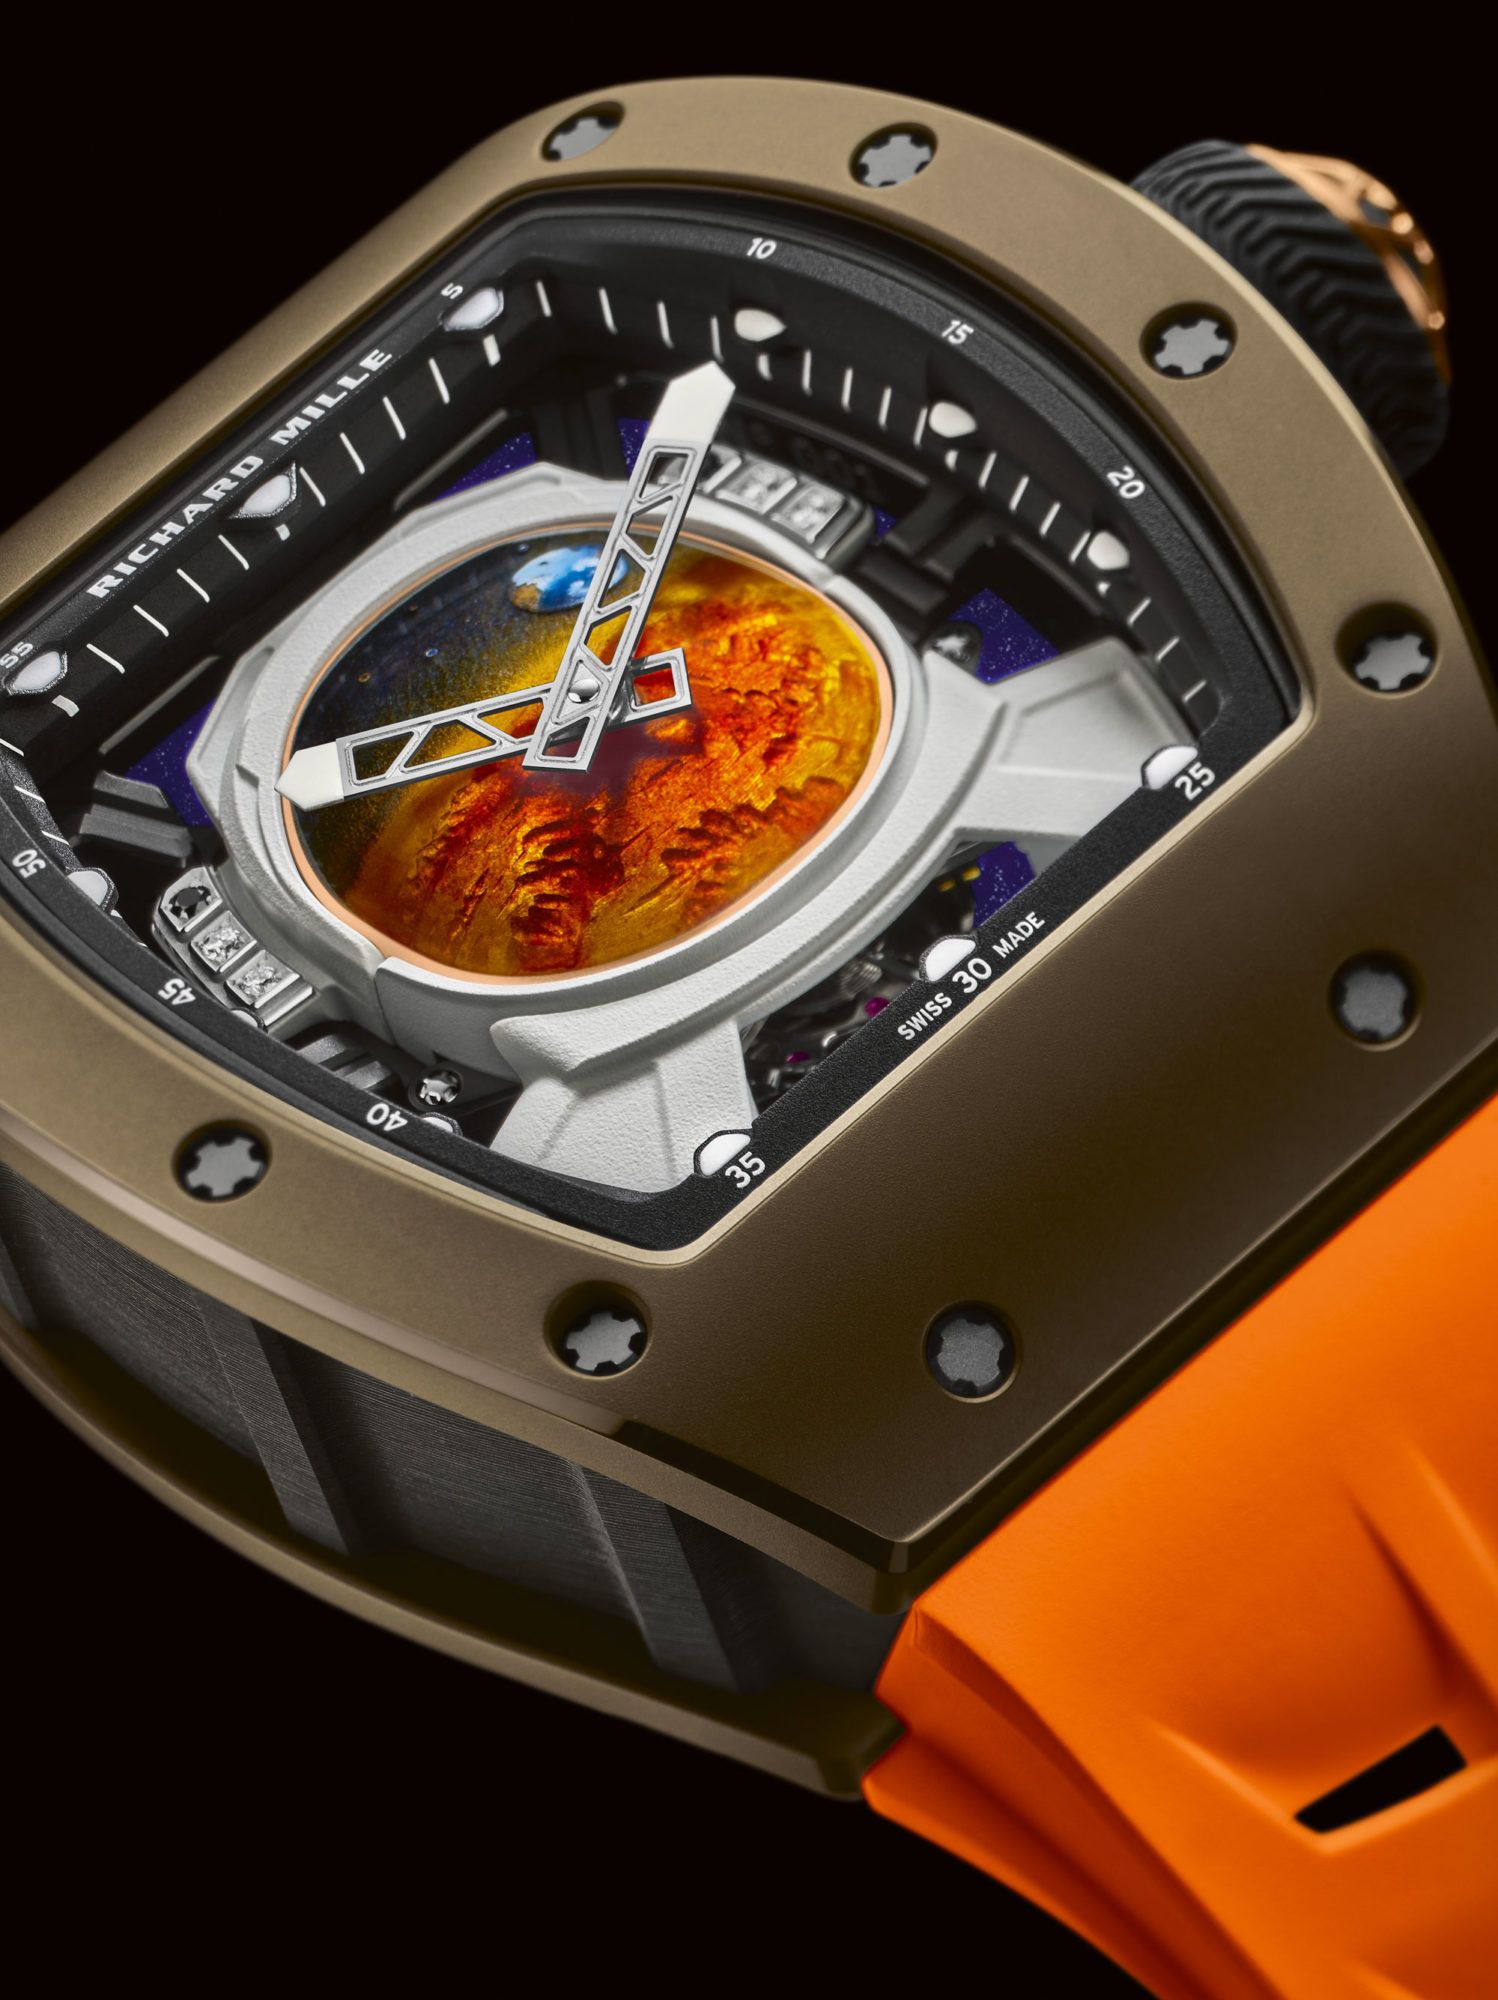 Richard Mille RM16 Full Rose Gold Transparent Skeleton Dial Watch RM016Richard Mille Automatic Winding CARBON TPT - RM 037